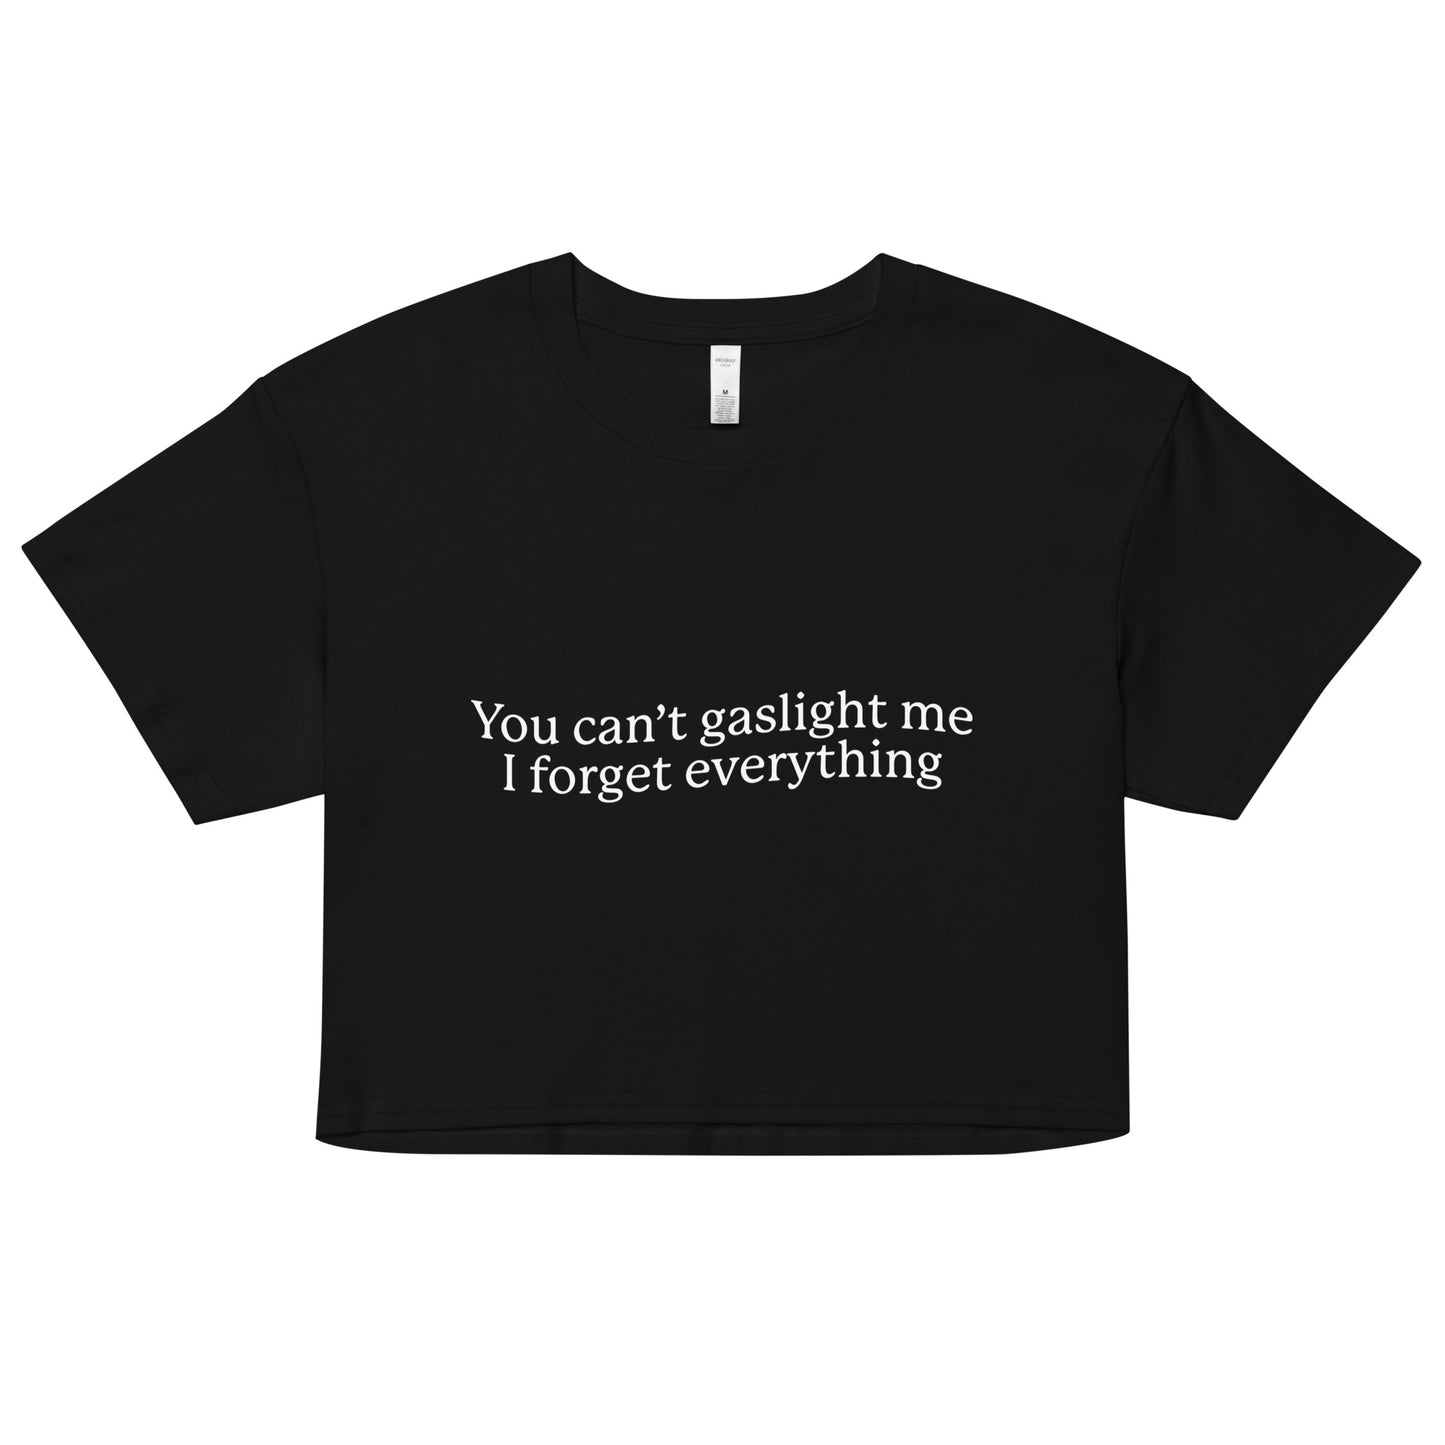 You Can't Gaslight Me I Forget Everything crop top